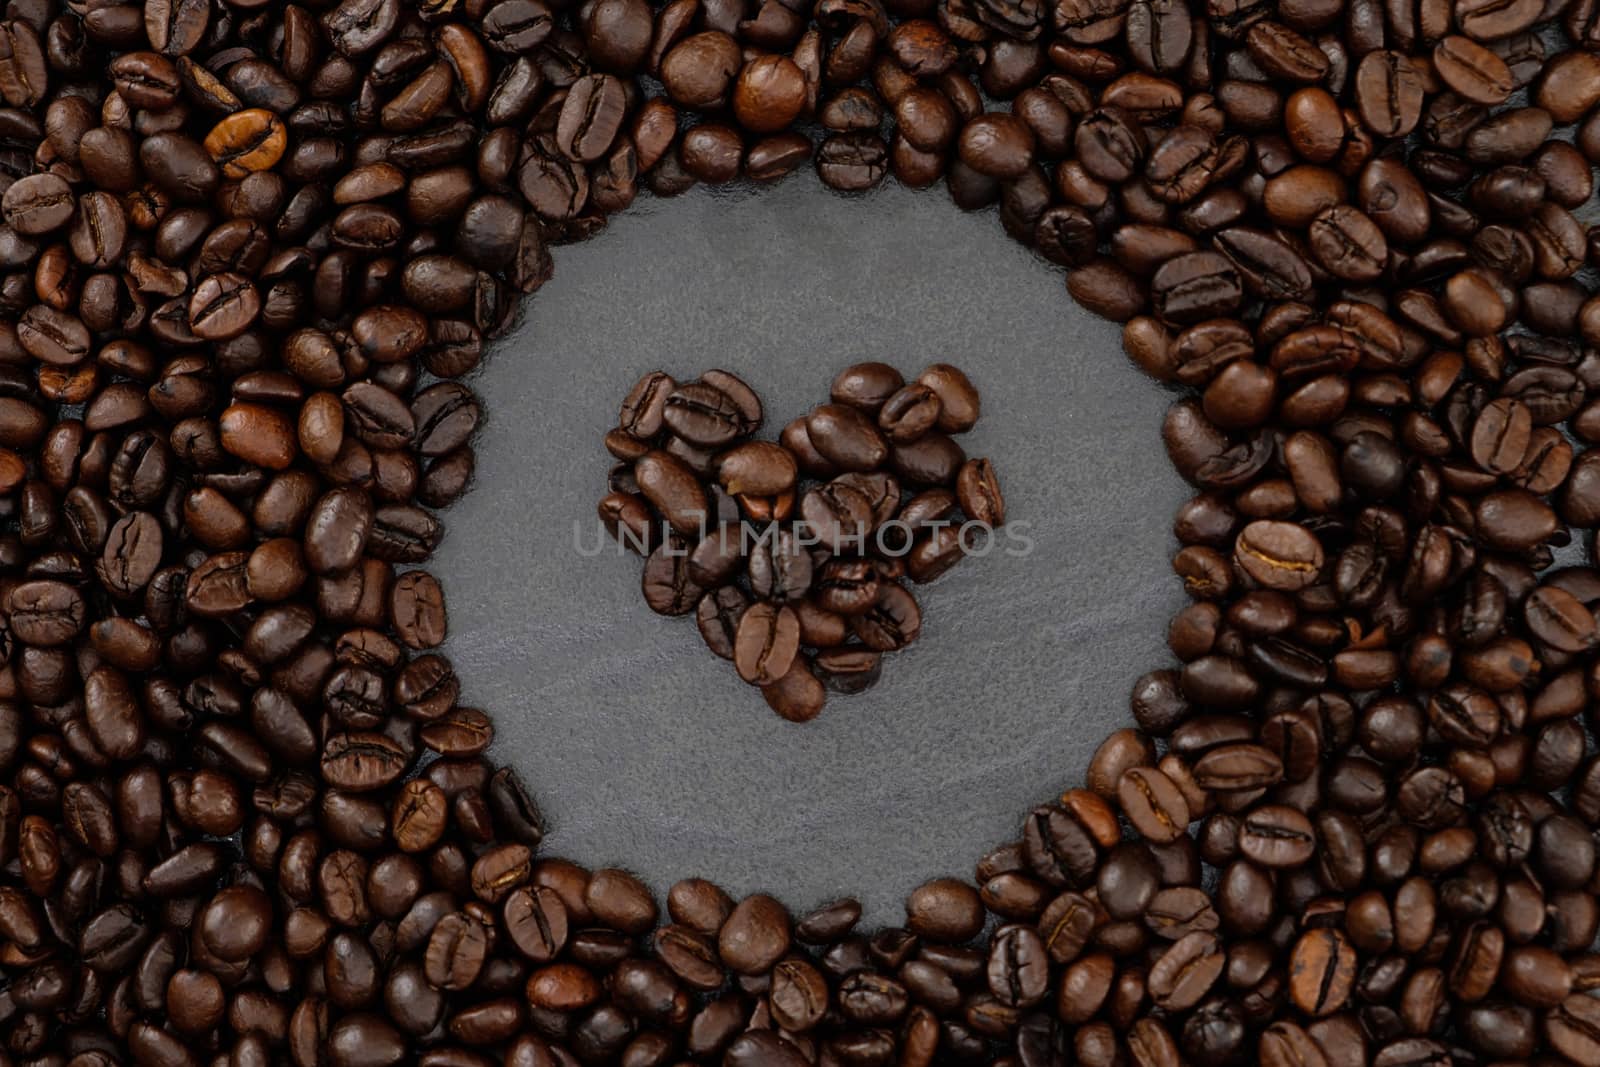 roasted coffee beans background with copy space, heart shape center.